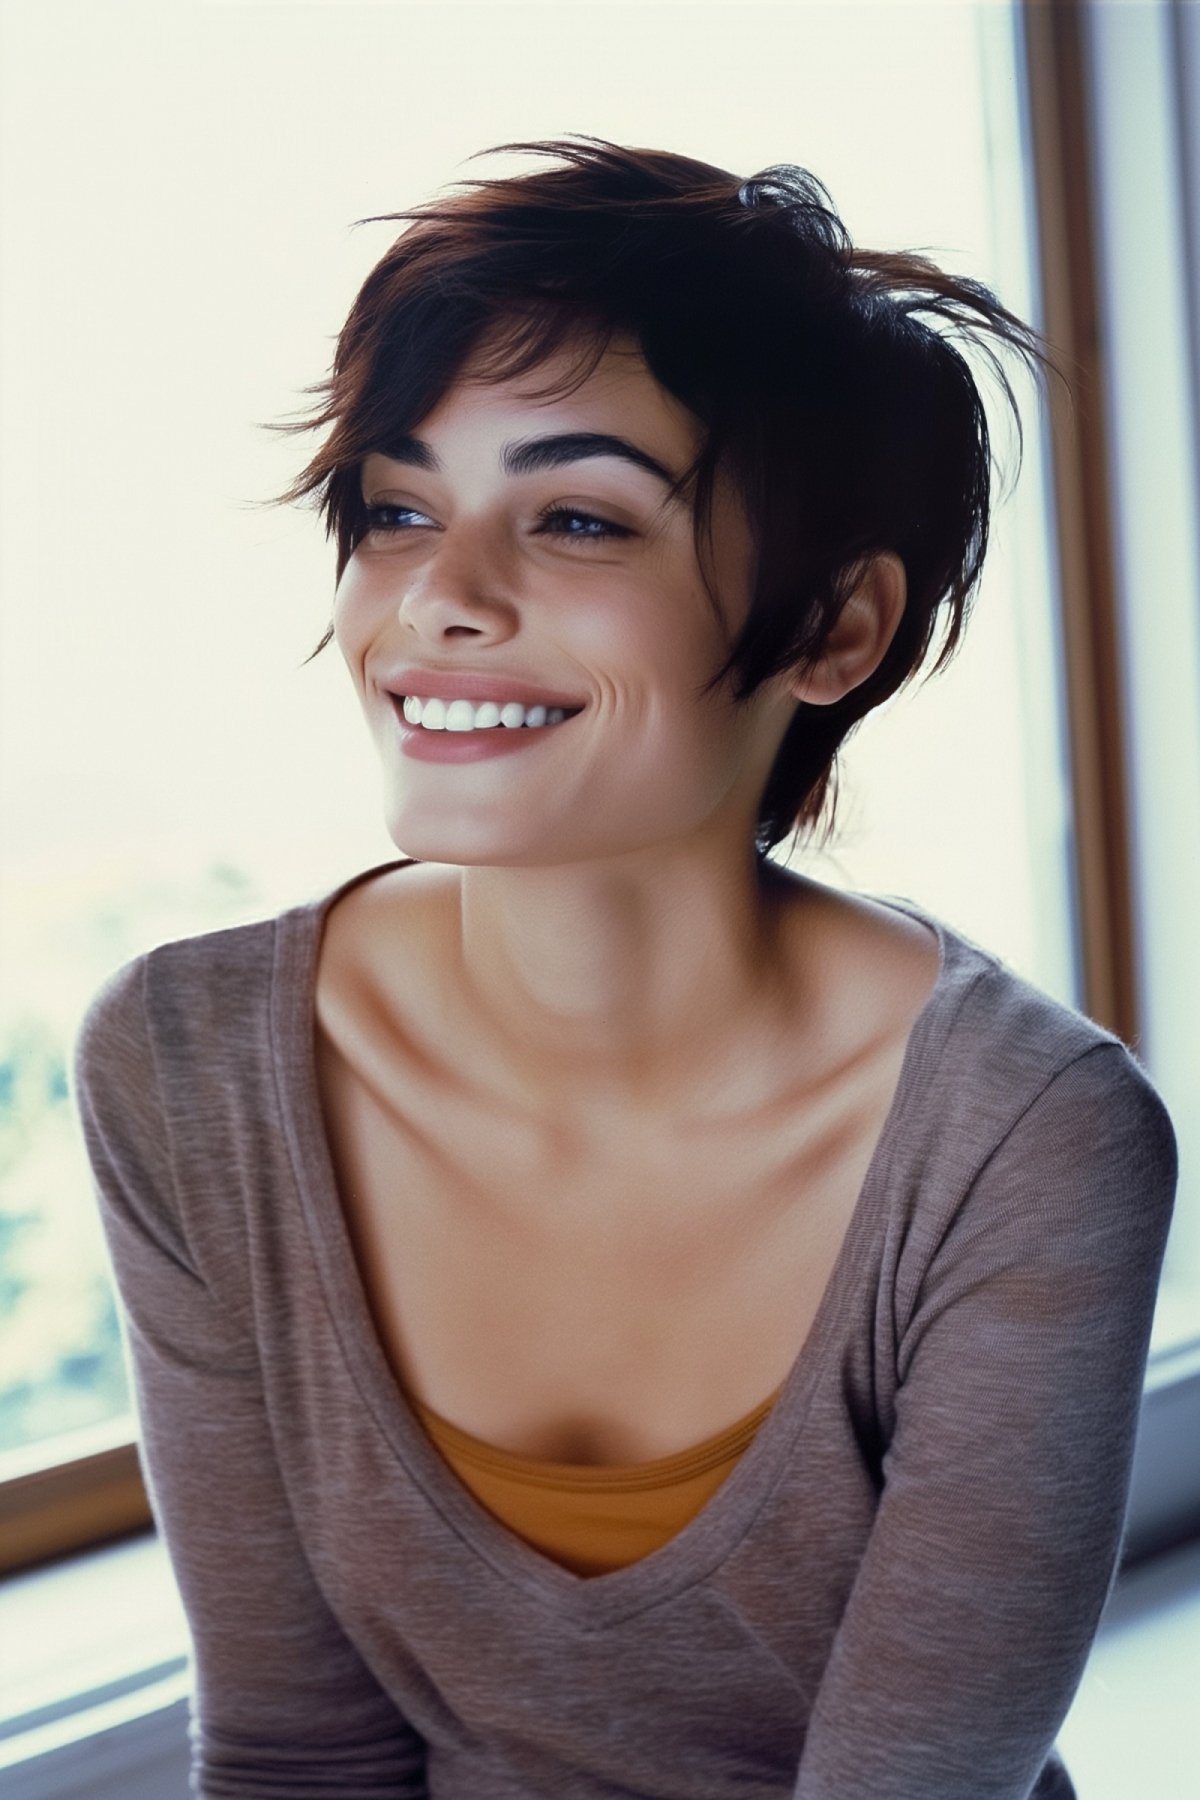 Woman with a chic elf crop haircut and a natural smile